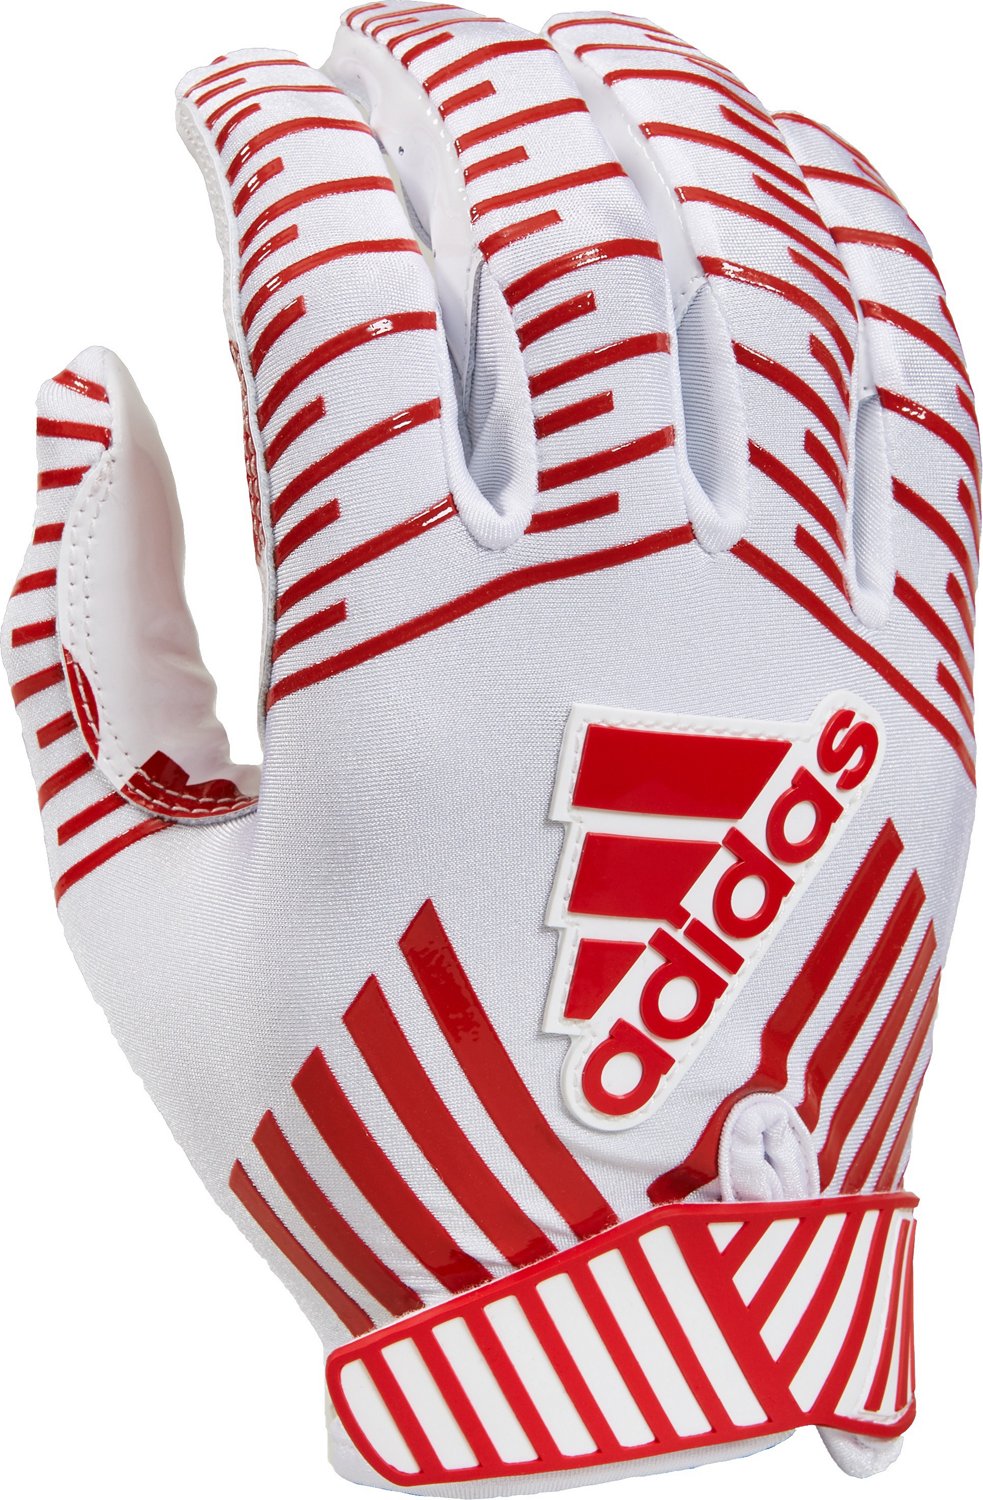 adidas filthy quick football gloves